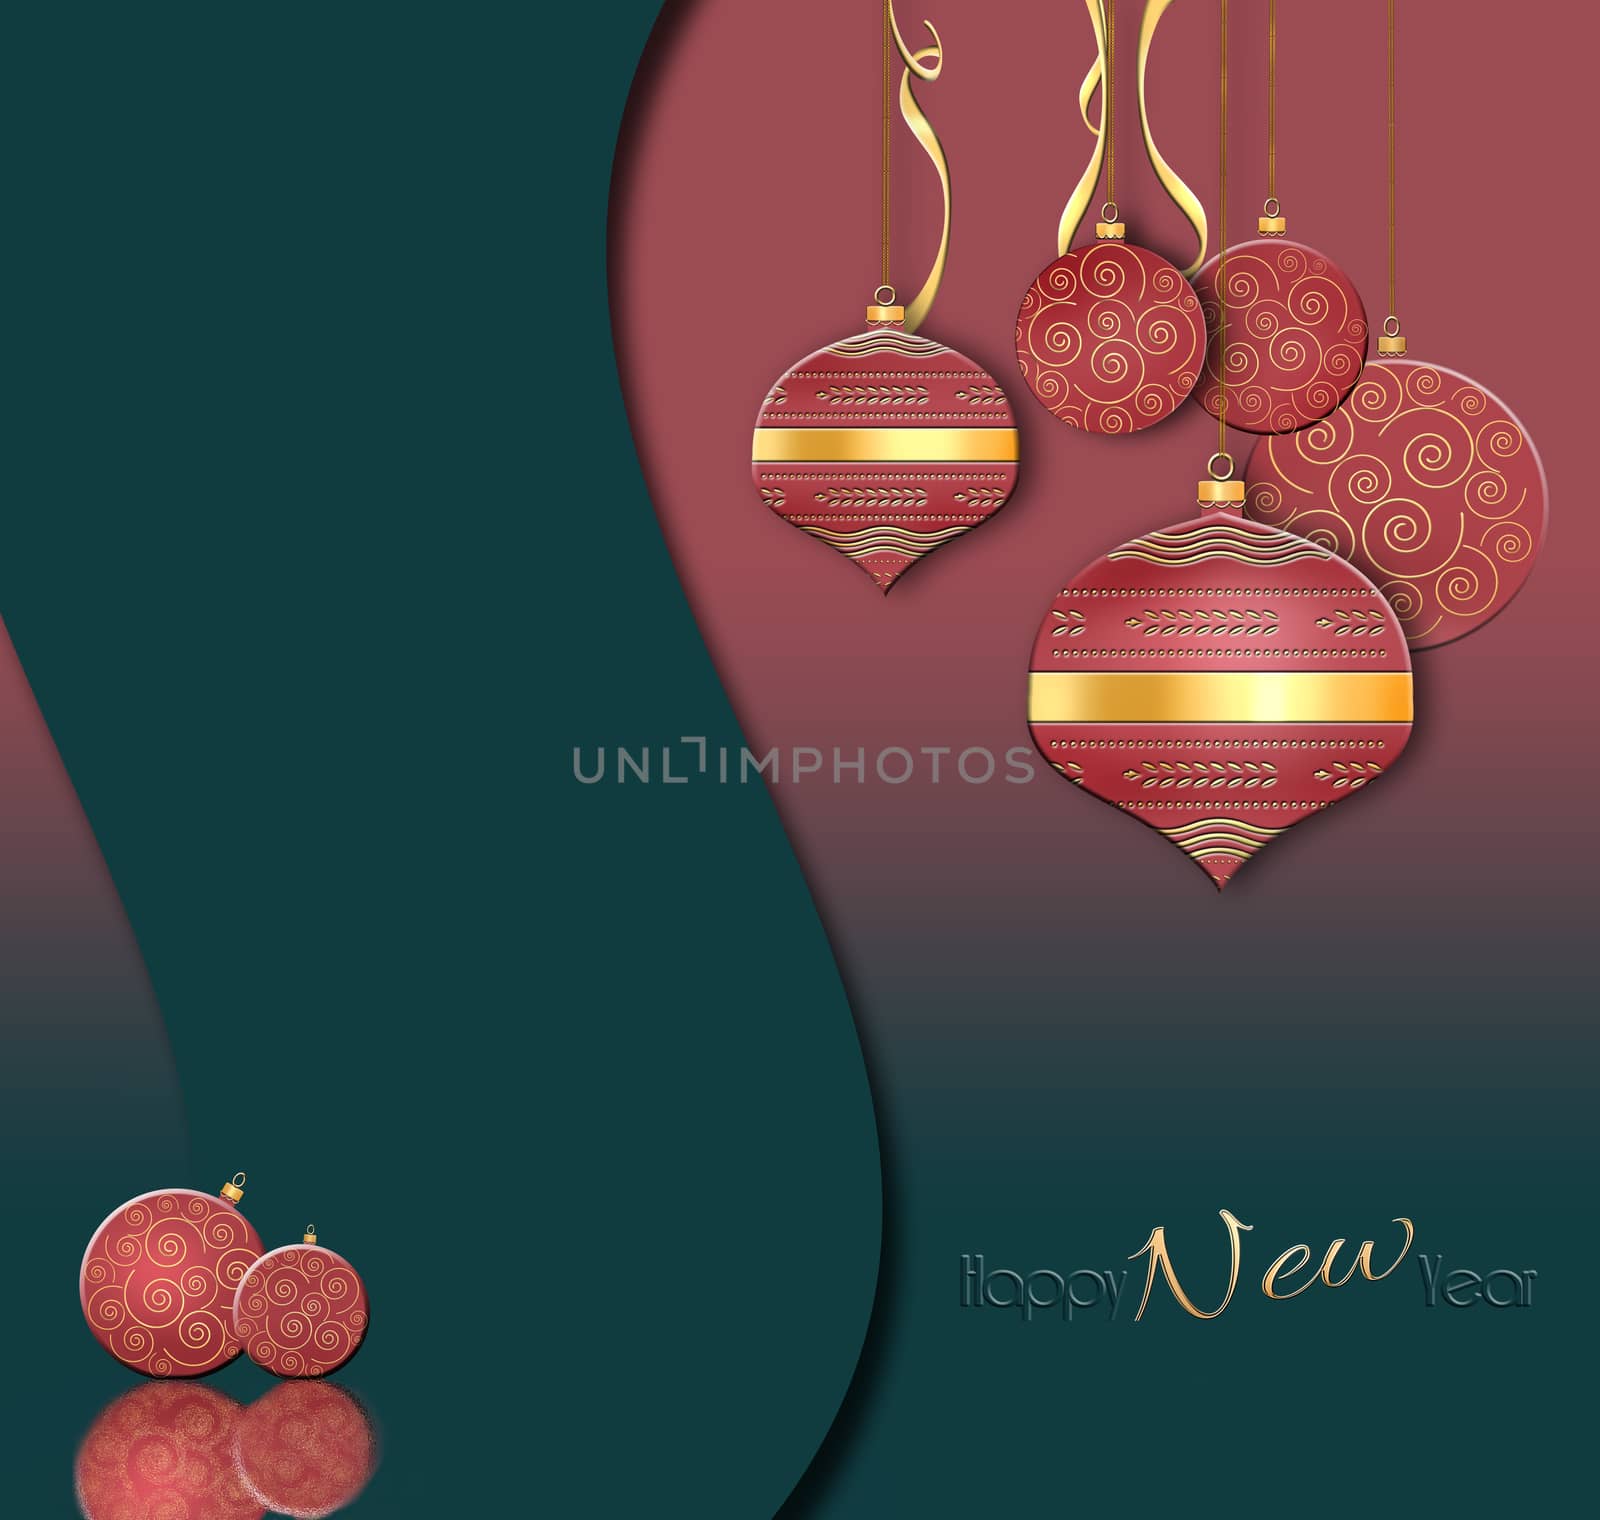 Luxury Christmas and 2021 New Year balls background in Chinese style. Hanging red baubles with gold decor on black green background. Text Happy New year. 3D illustration